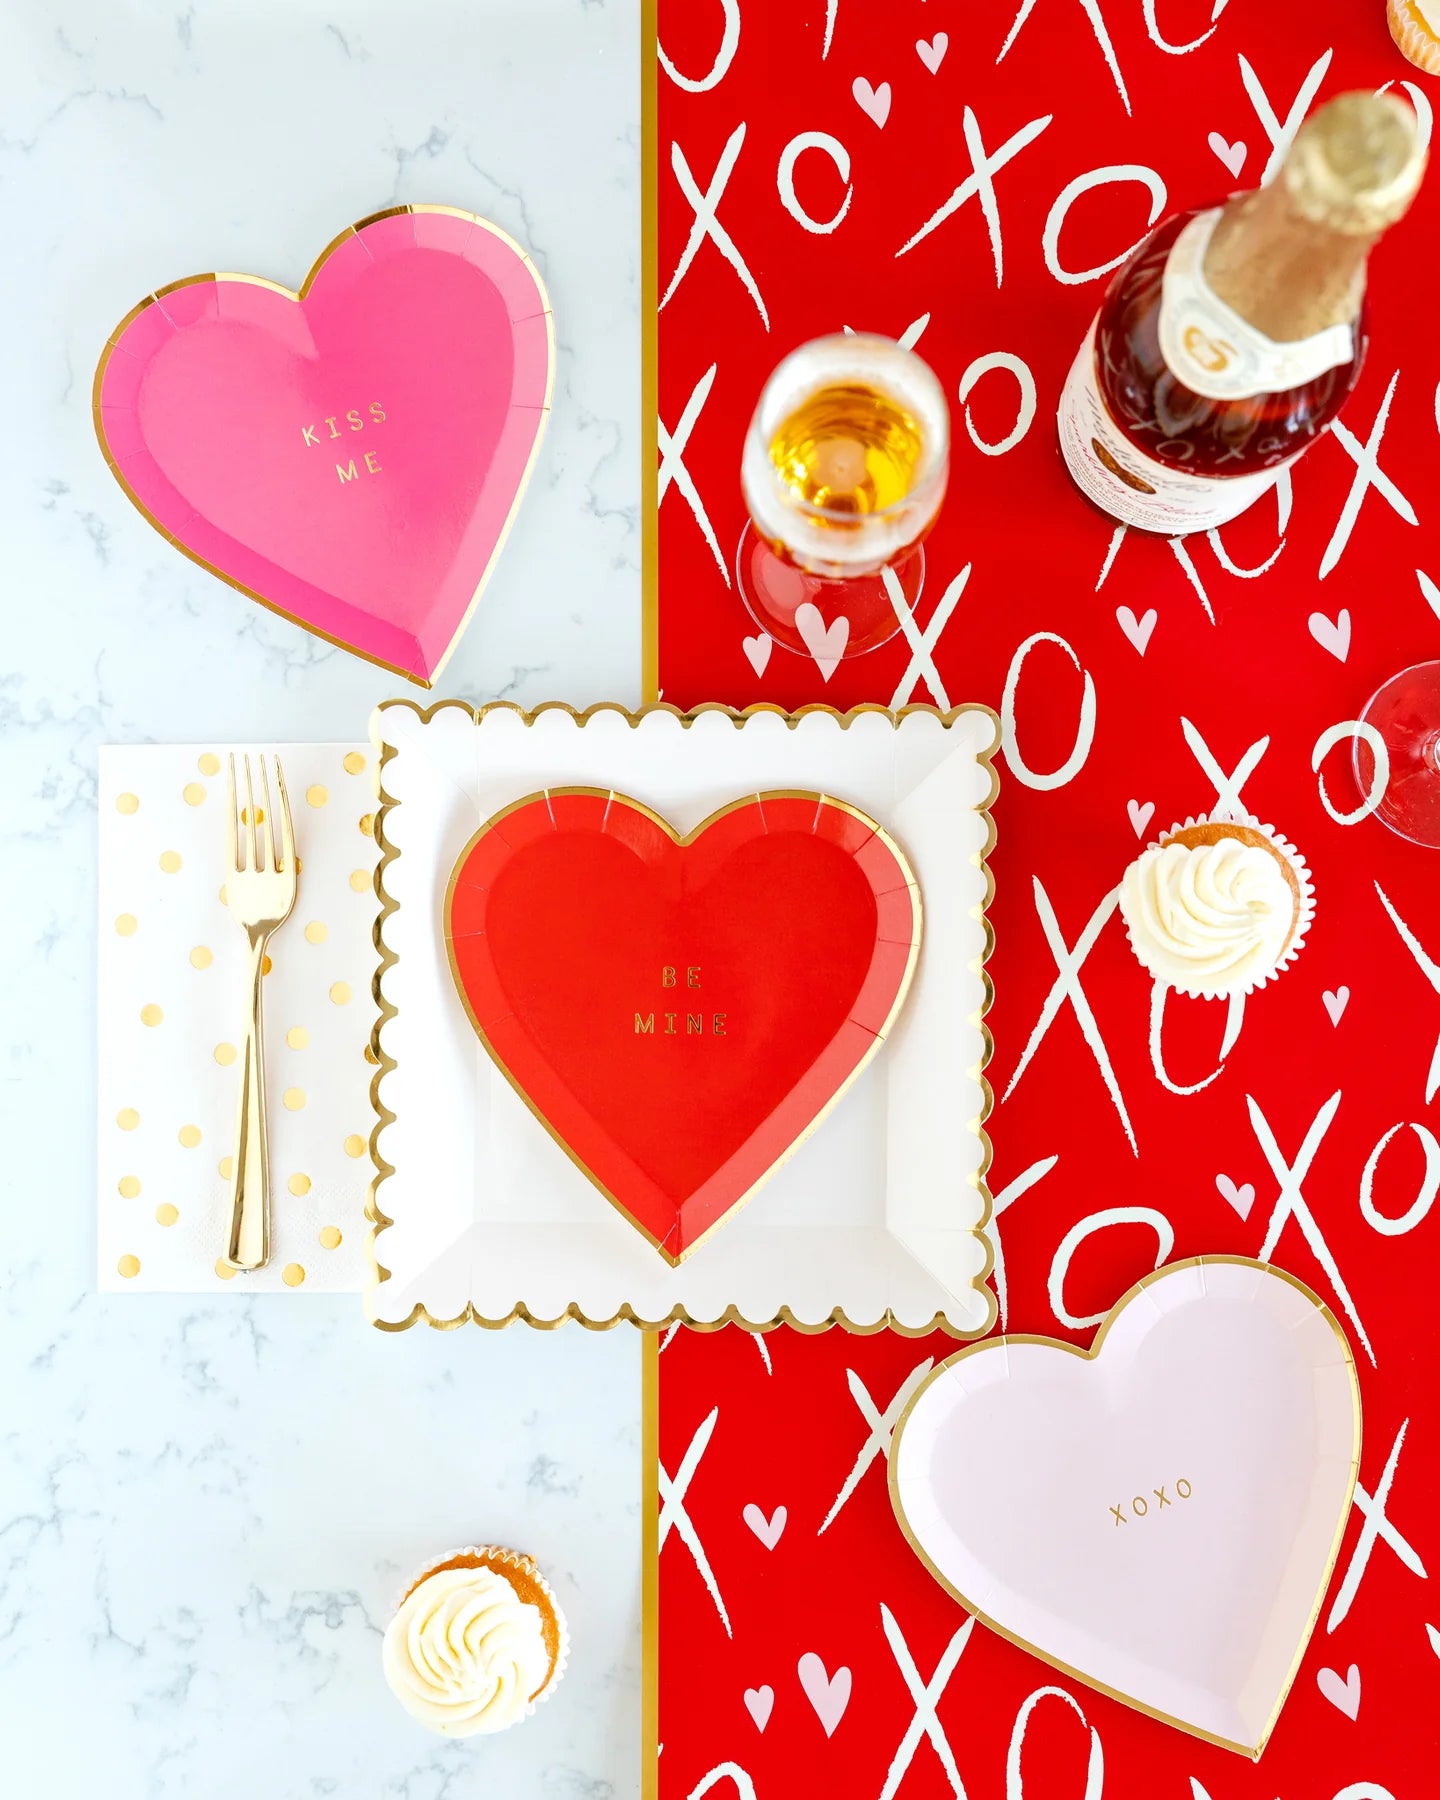 kiss me, be mine, xoxo heart shaped plates in three different shades of red and pink